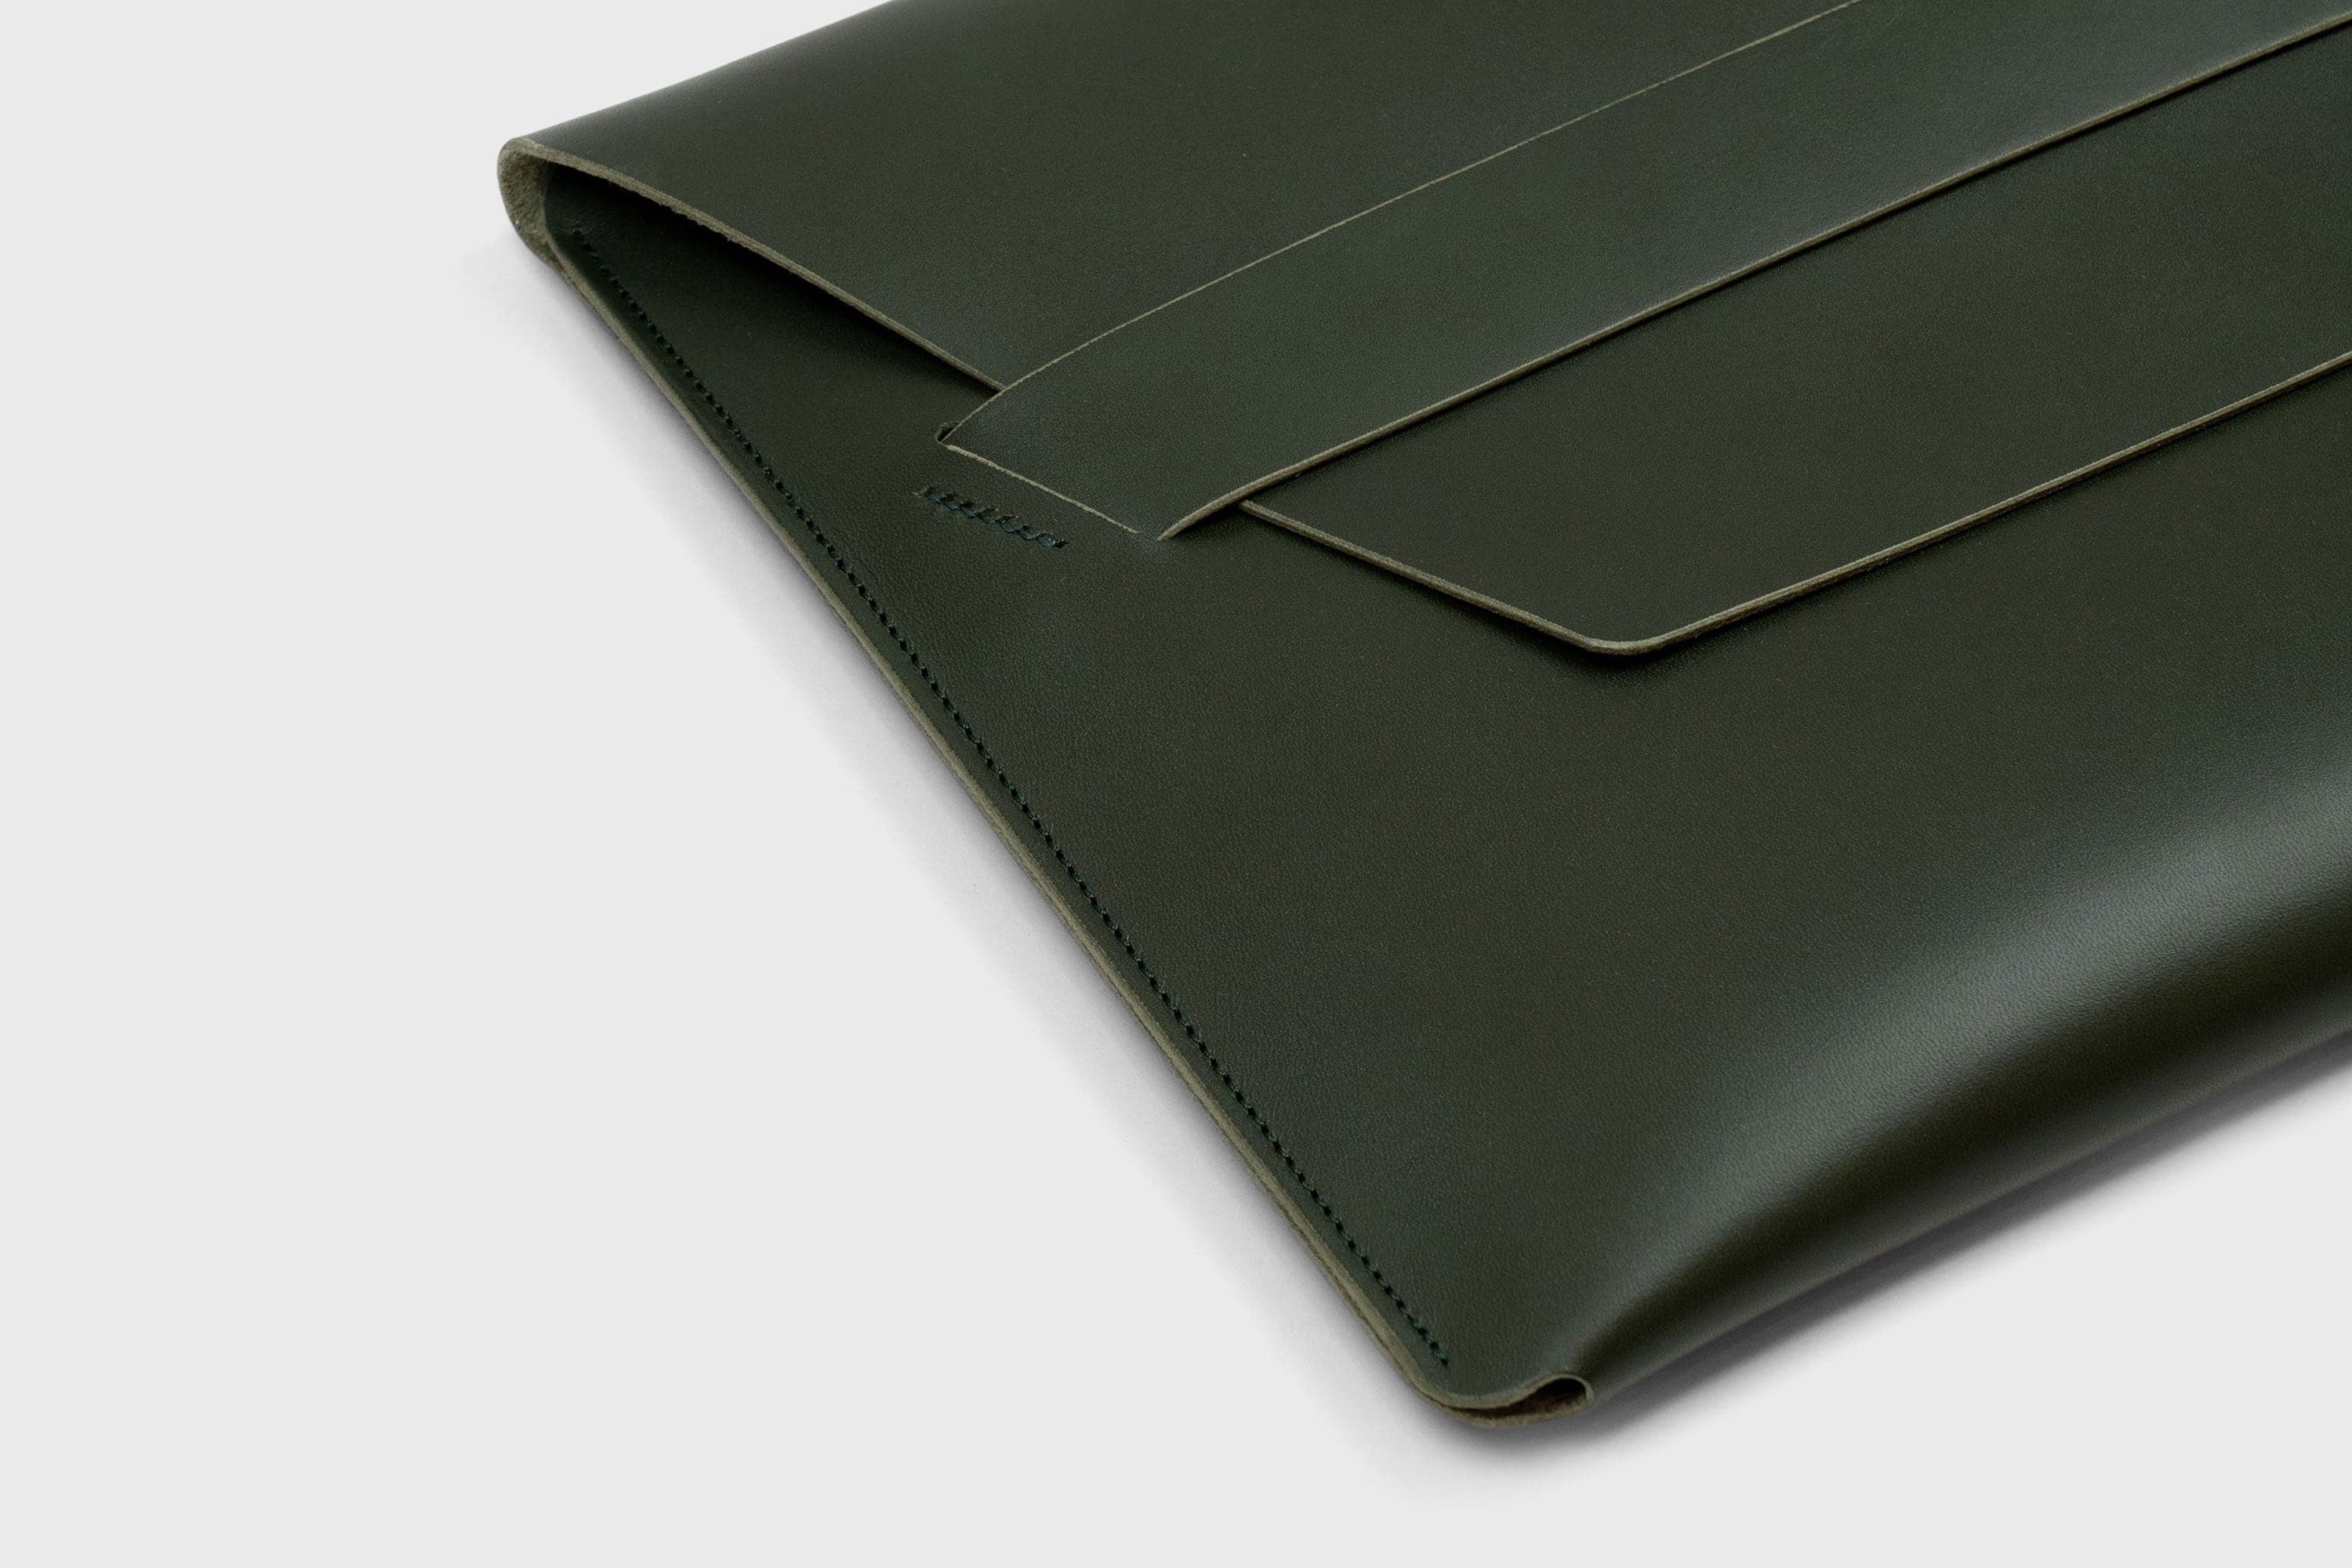 MacBook Pro 14 Inch Leather Sleeve Premium Dark Olive Green Color Handmade and Designed By Manuel Dreesmann Atelier Madre Barcelona Spain